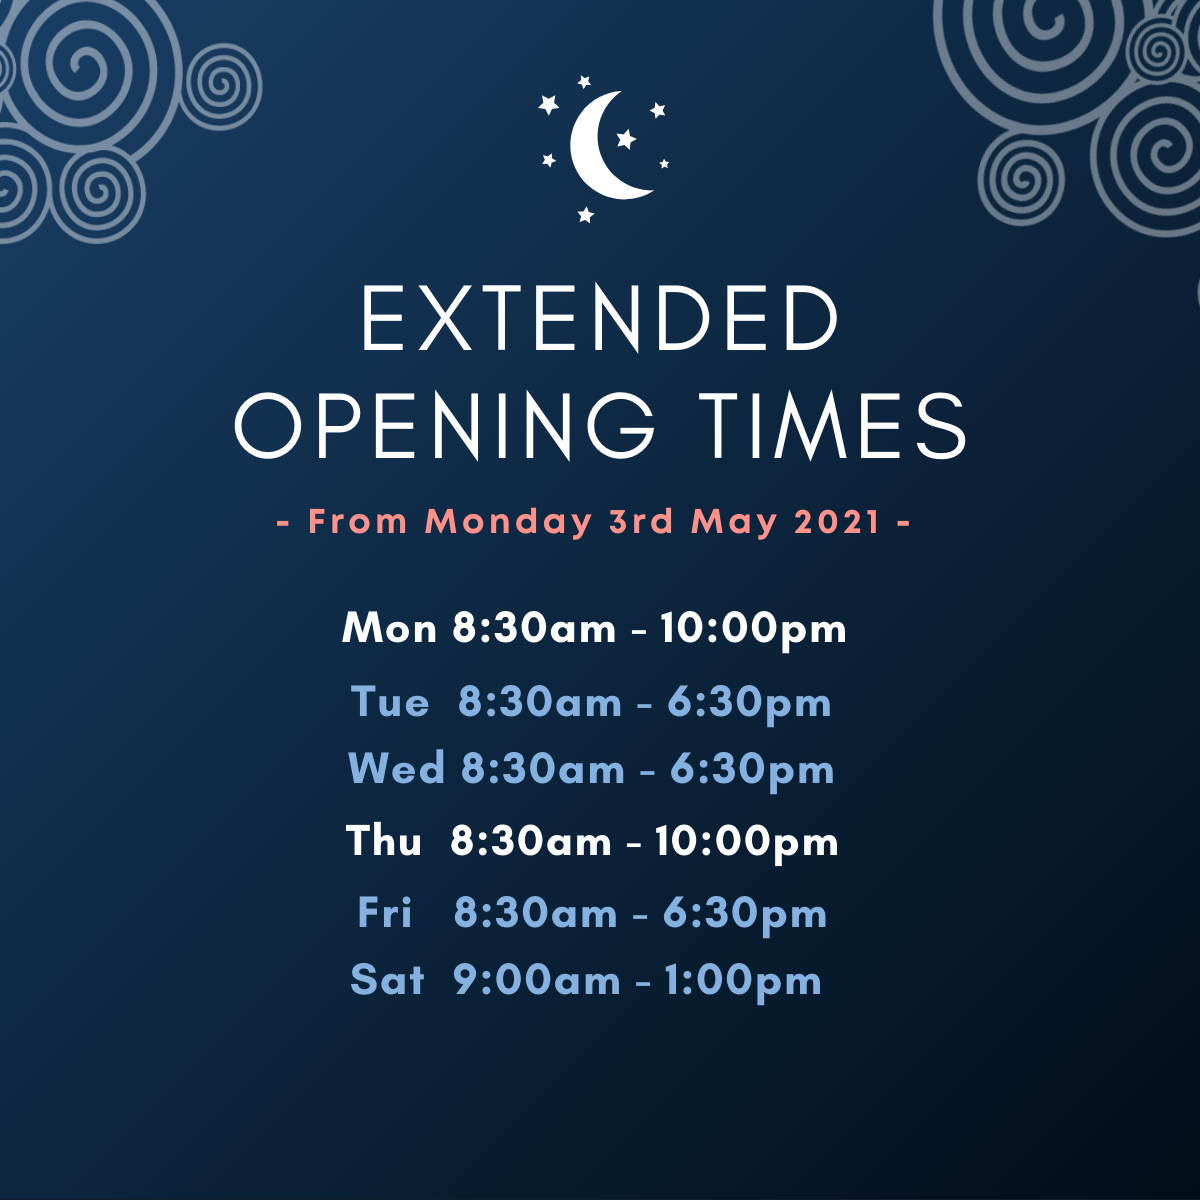 Central Wellness extended opening times schedule